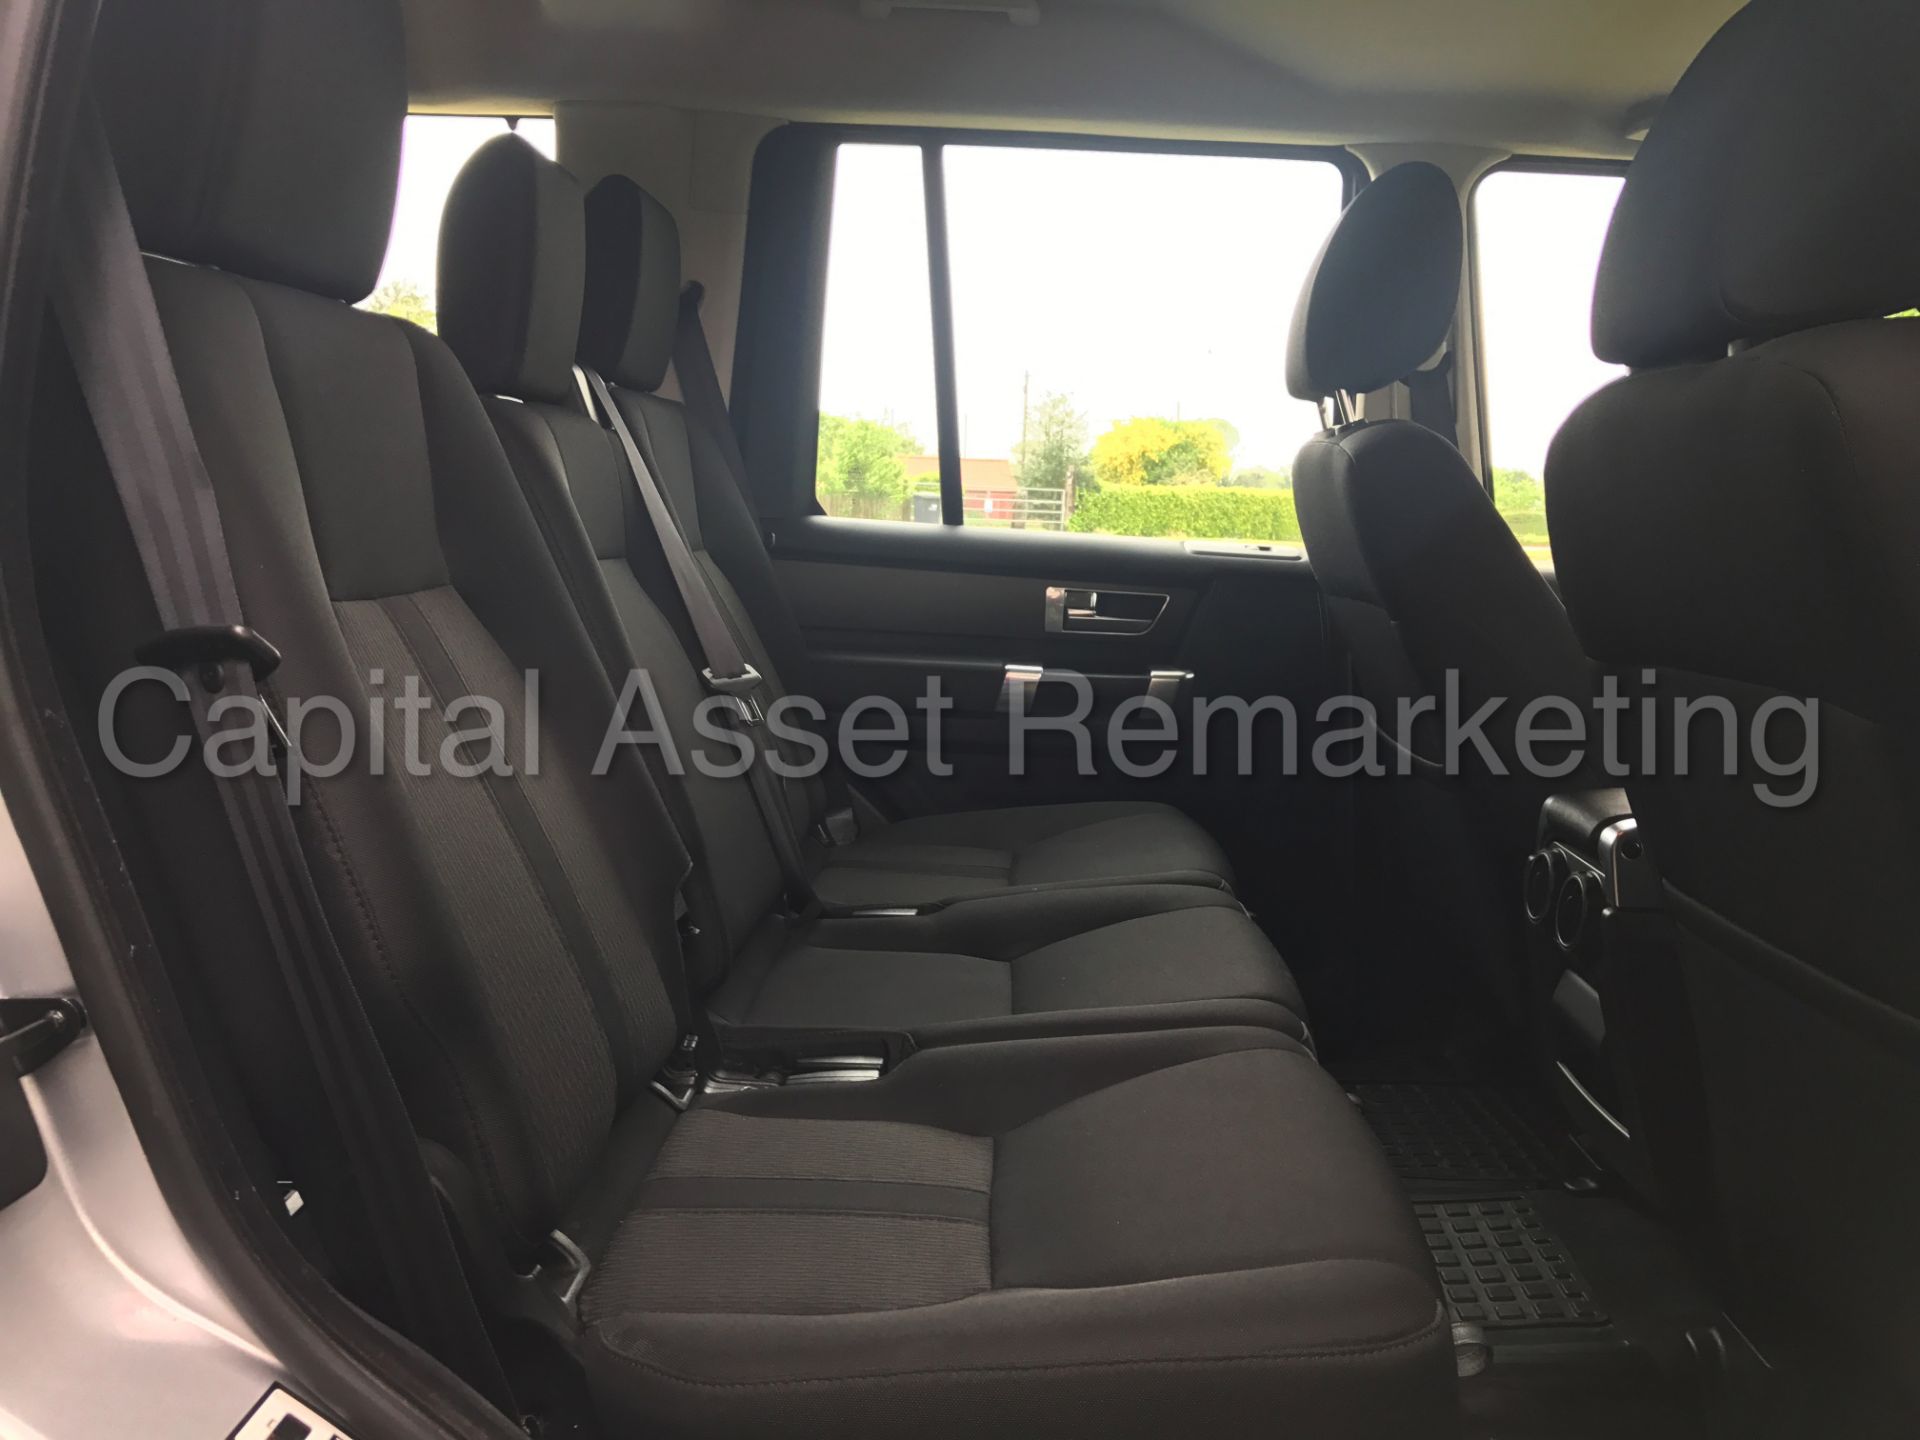 (On sale) LAND ROVER DISCOVERY 4 (2014 MODEL) '3.0 SDV6 -AUTO- 255 BHP - 7 SEATER'(1 OWNER FROM NEW) - Image 21 of 42